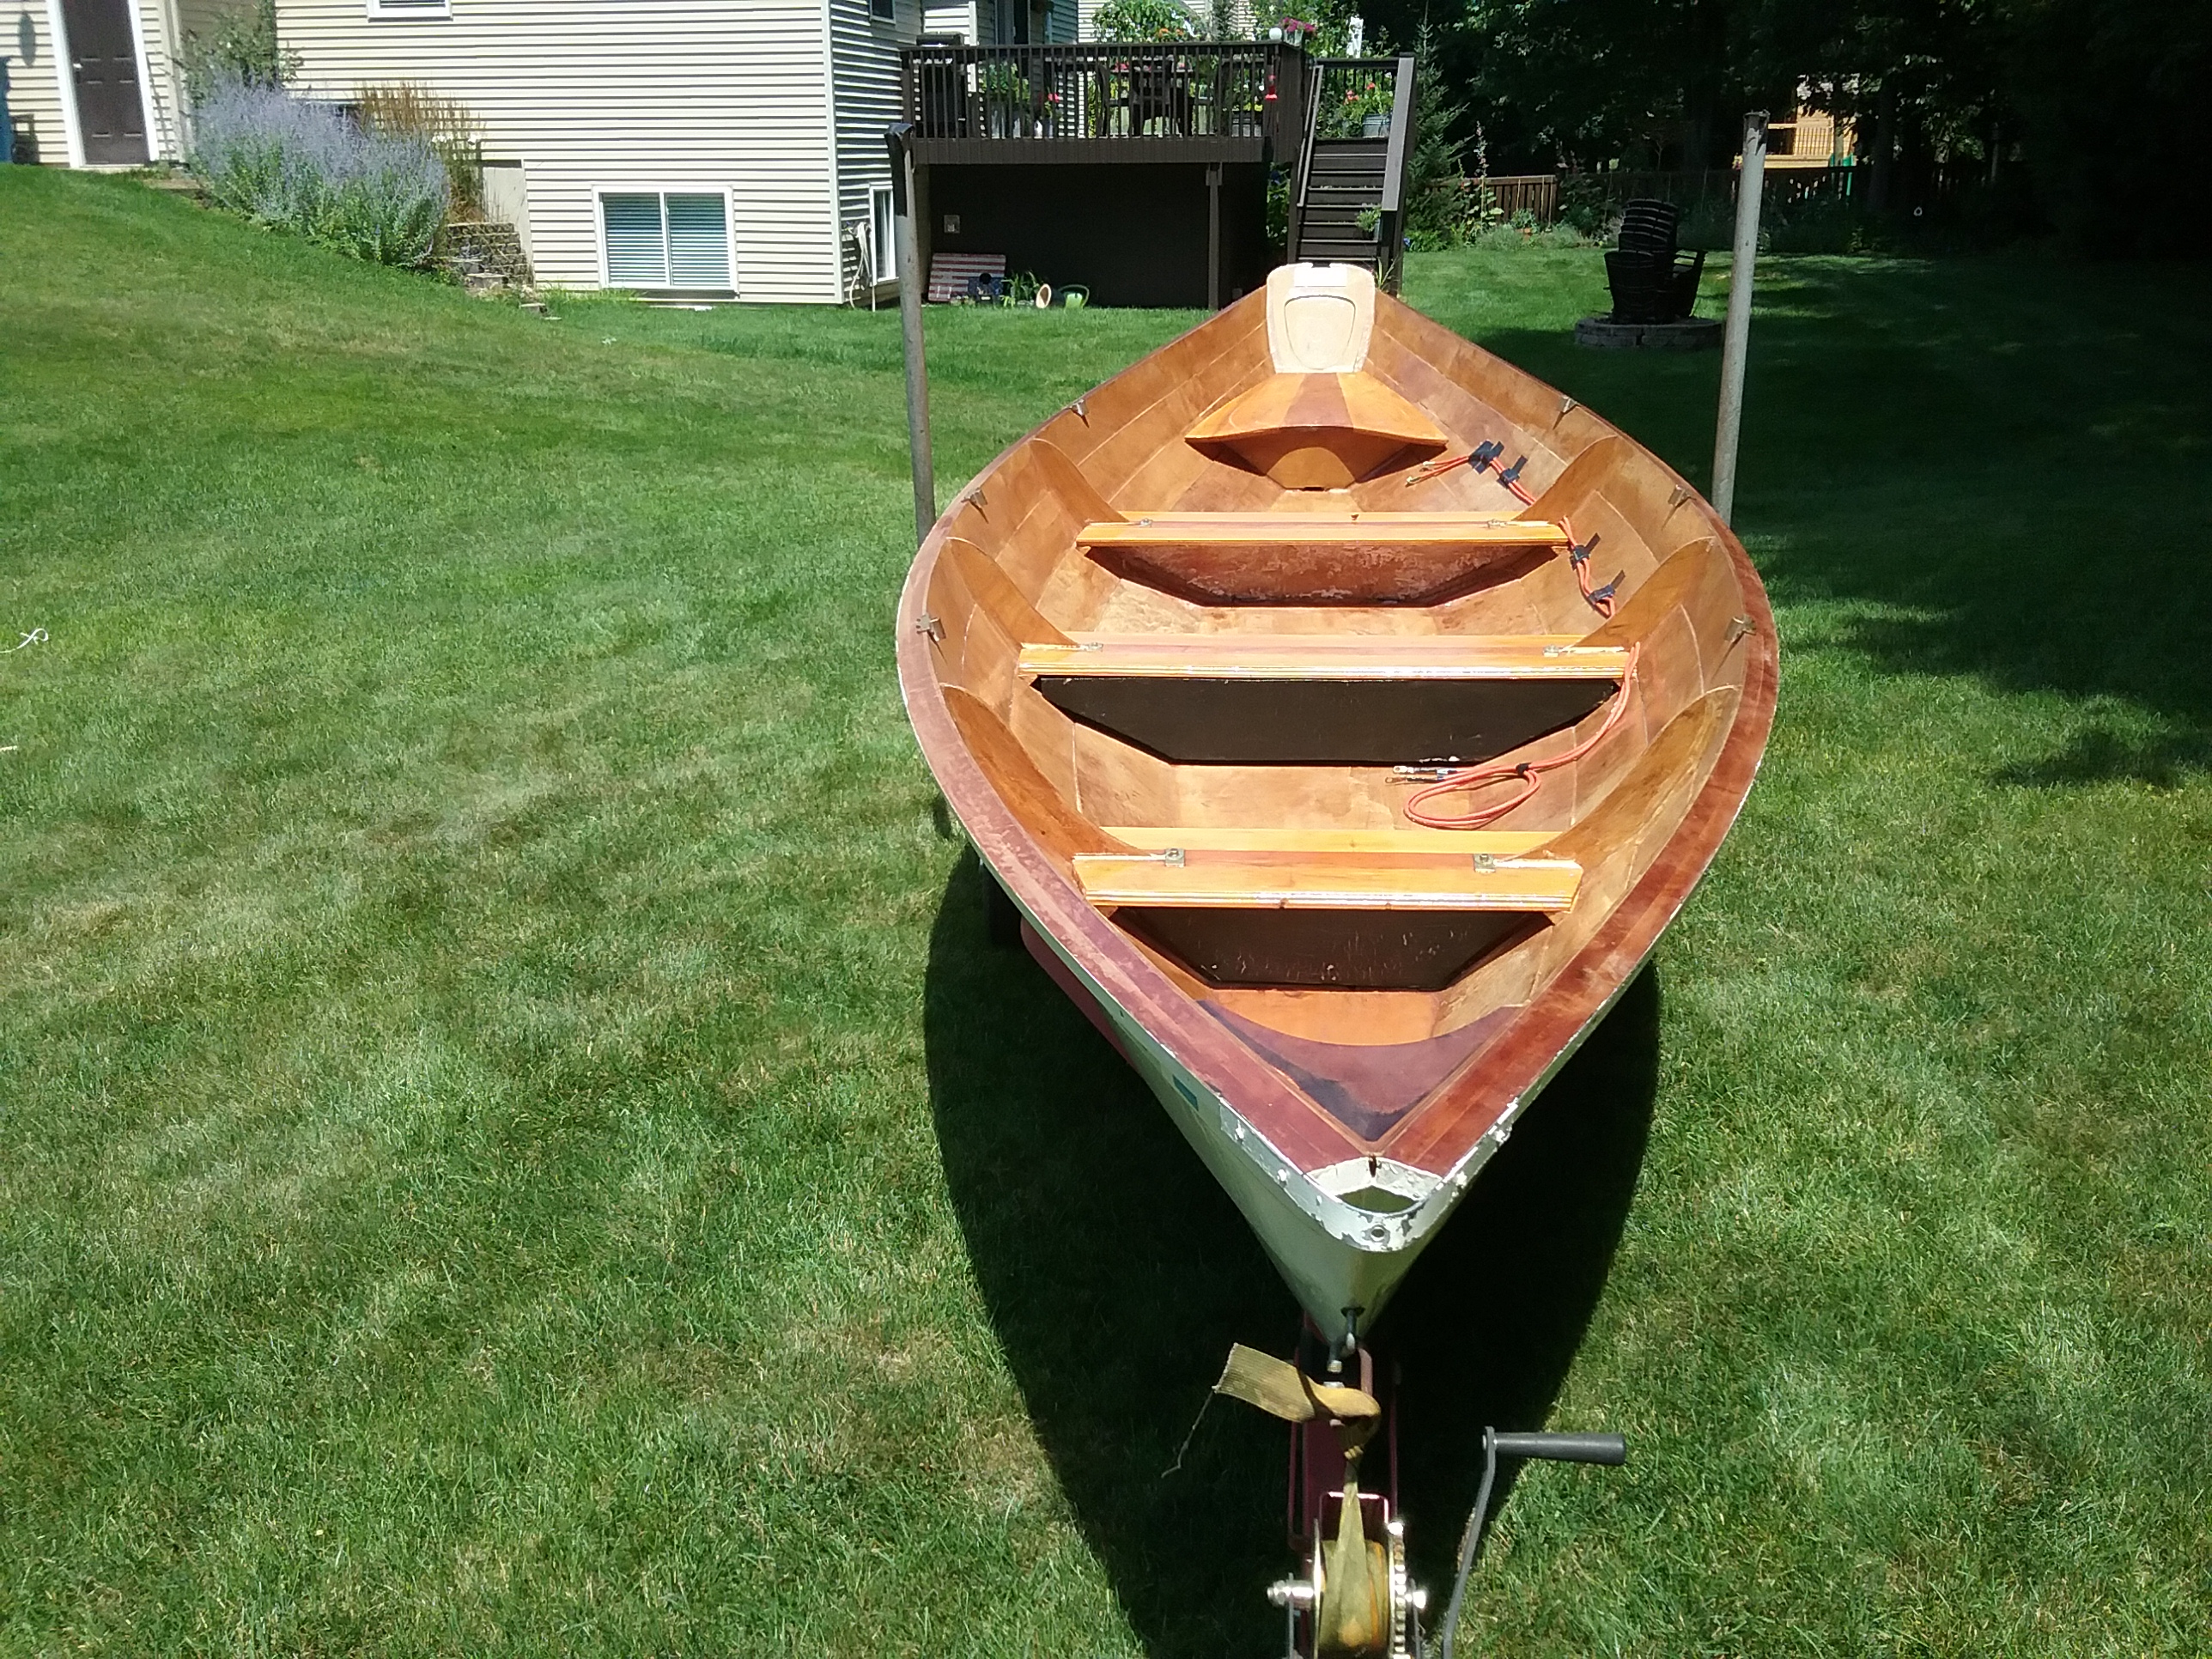 2009 17 foot Chesapeake northeaster dory Rowboat for sale in Grand Haven, MI - image 5 